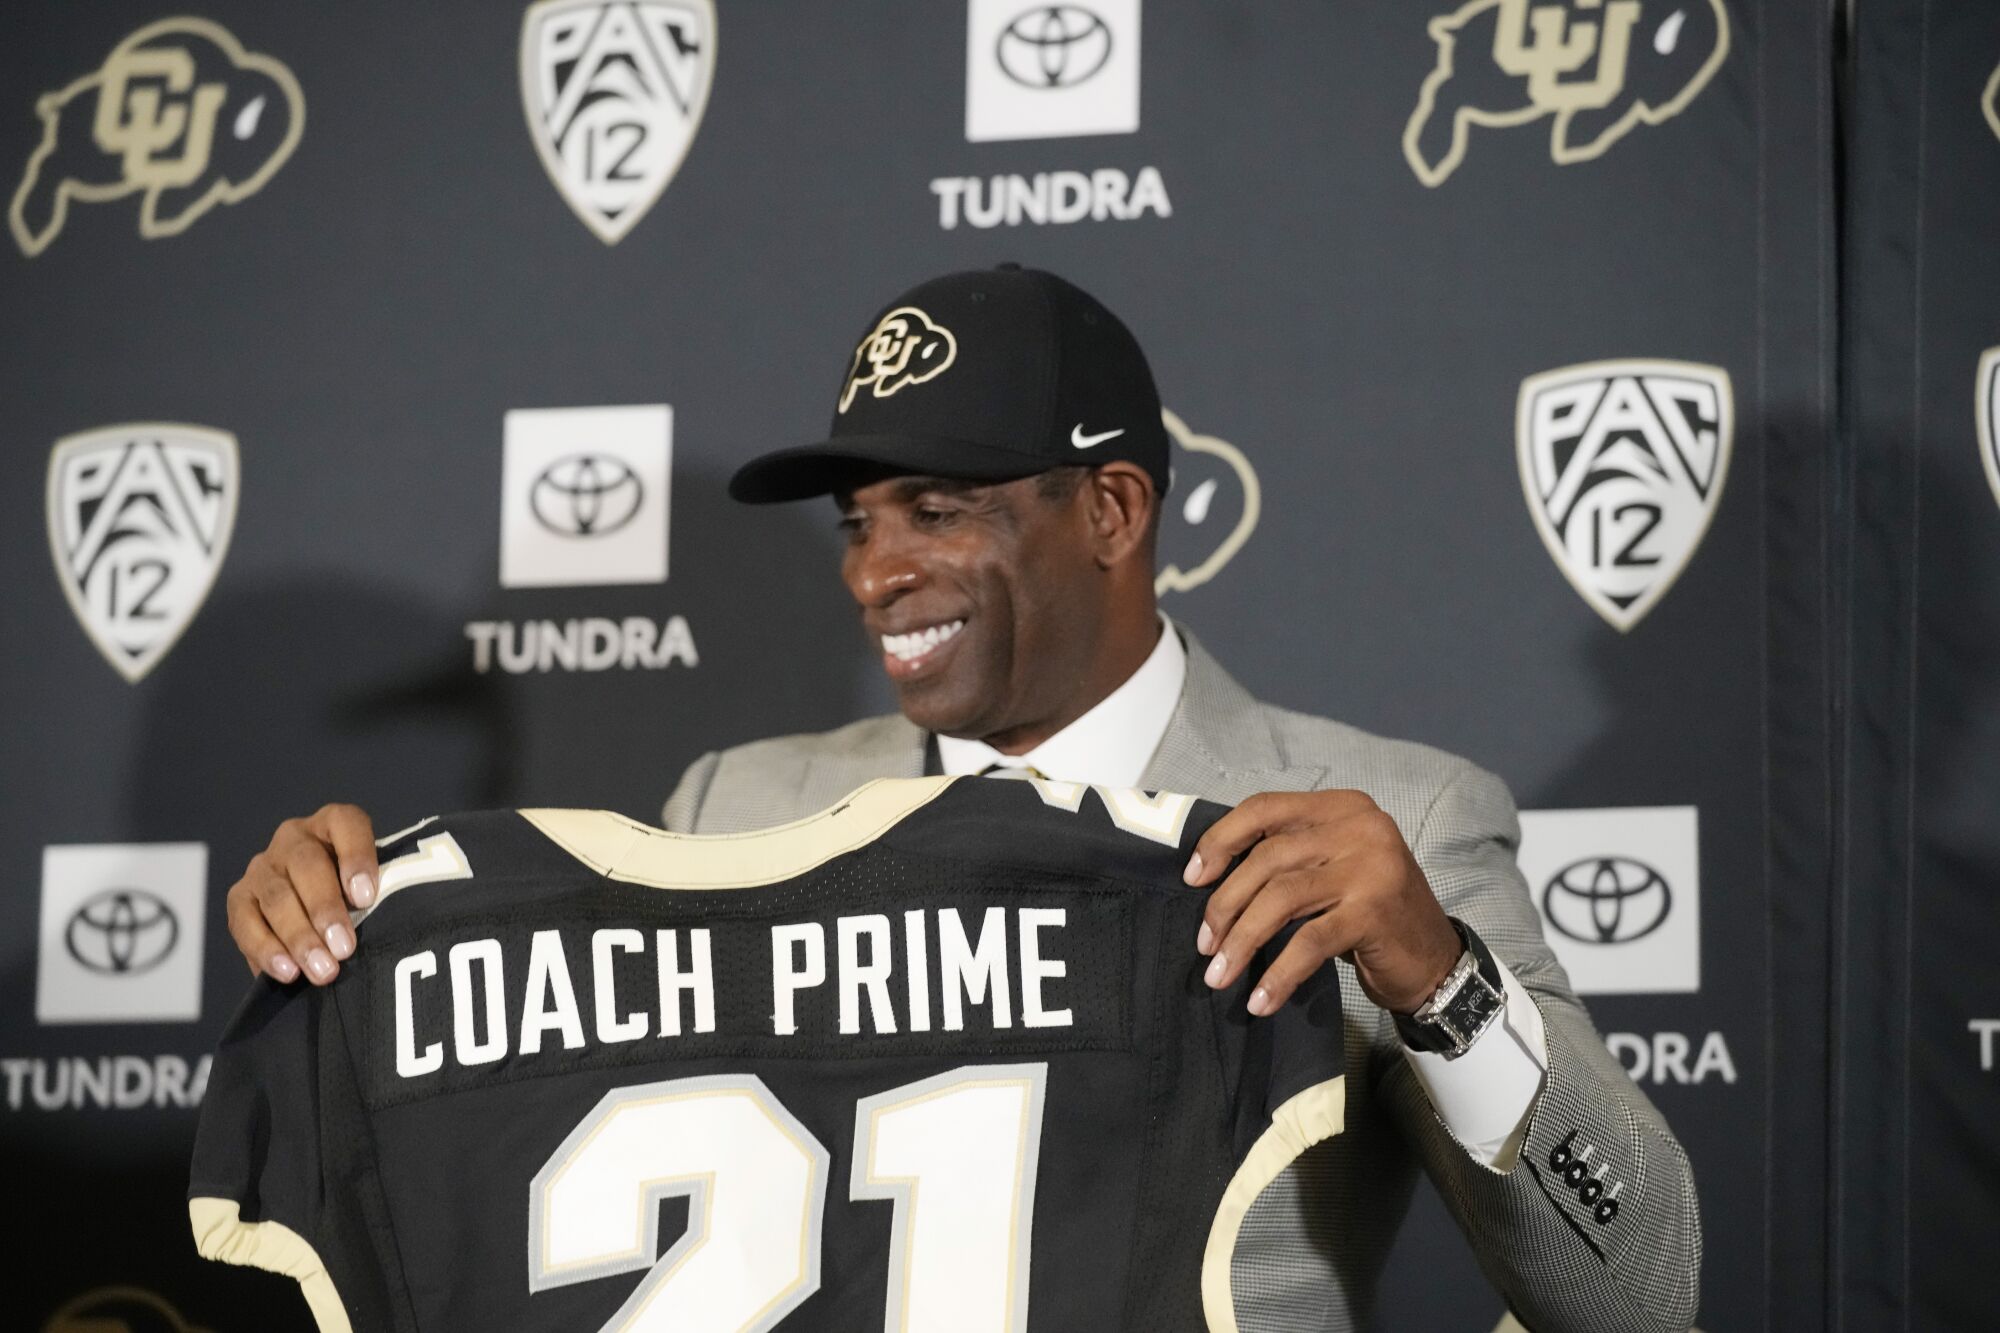 Deion Sanders holding a jersey with 'Coach Prime' on it after being introduced as Colorado's new coach 